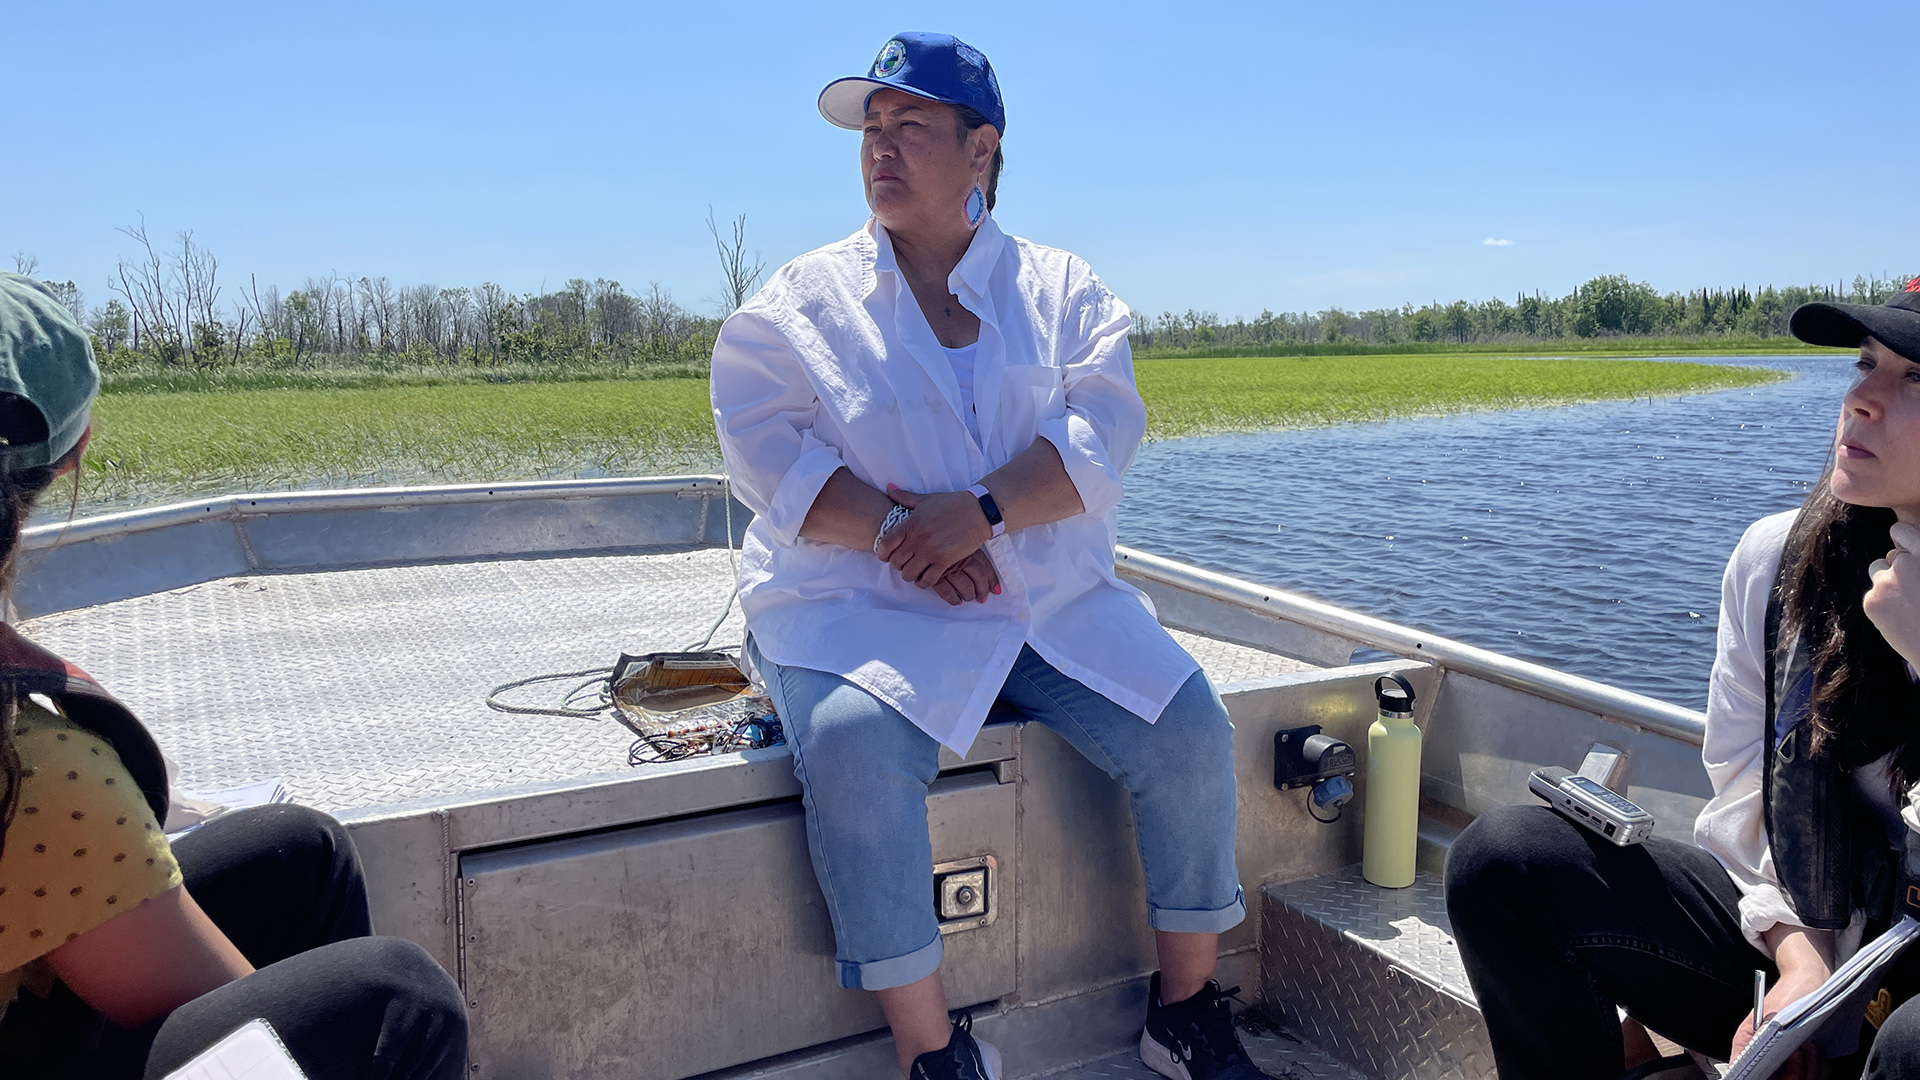 Edith Leoso sits on the bow of a metal boat and looks over the water, with two other people seated to the side and with wild rice beds and trees in the background.